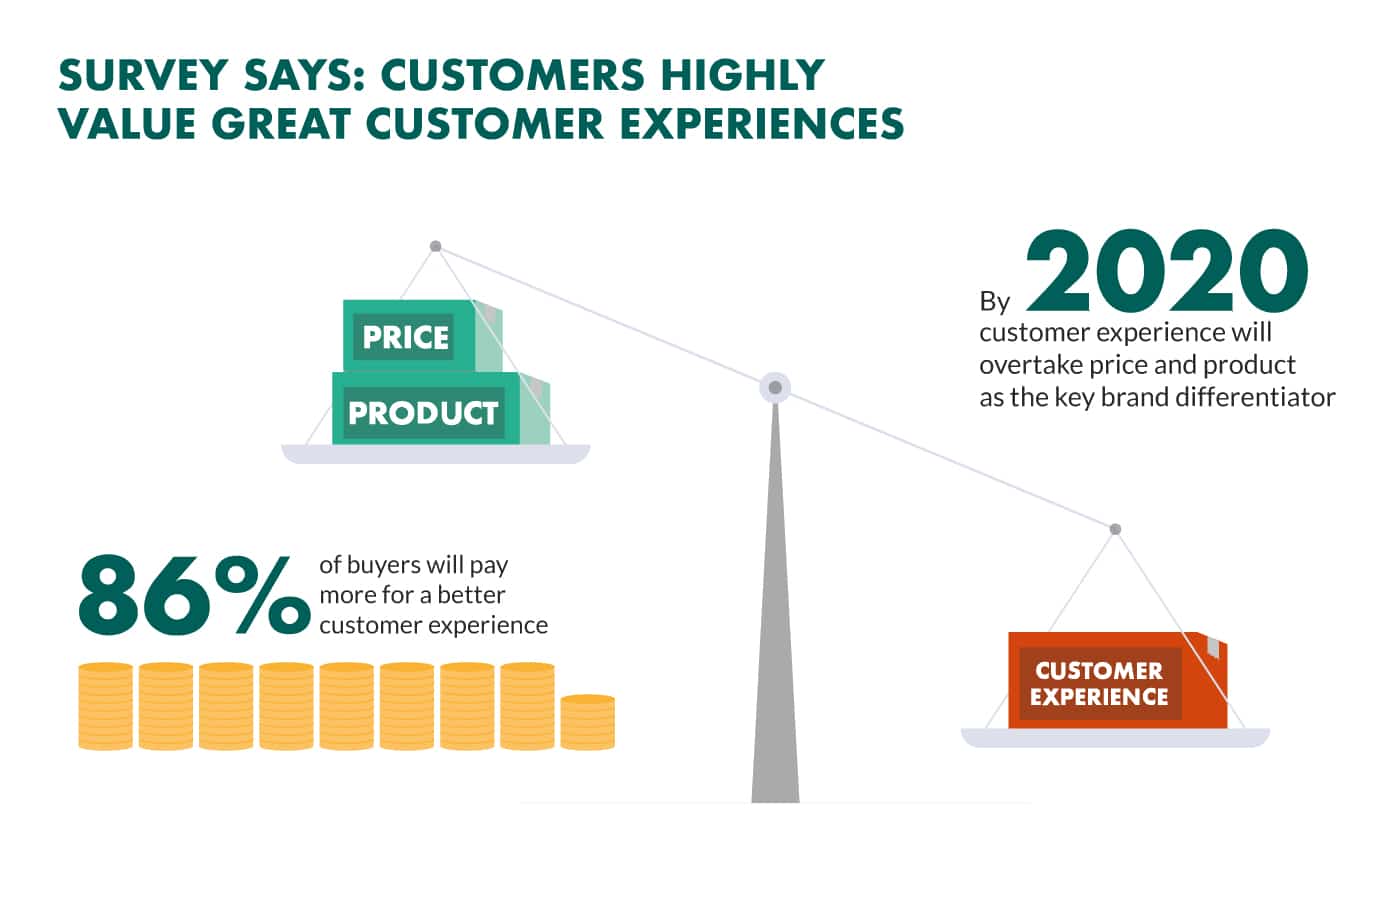 86% of customers say that they are likely to pay more money for a strong customer experience, which is one of the most important multi-channel marketing challenges